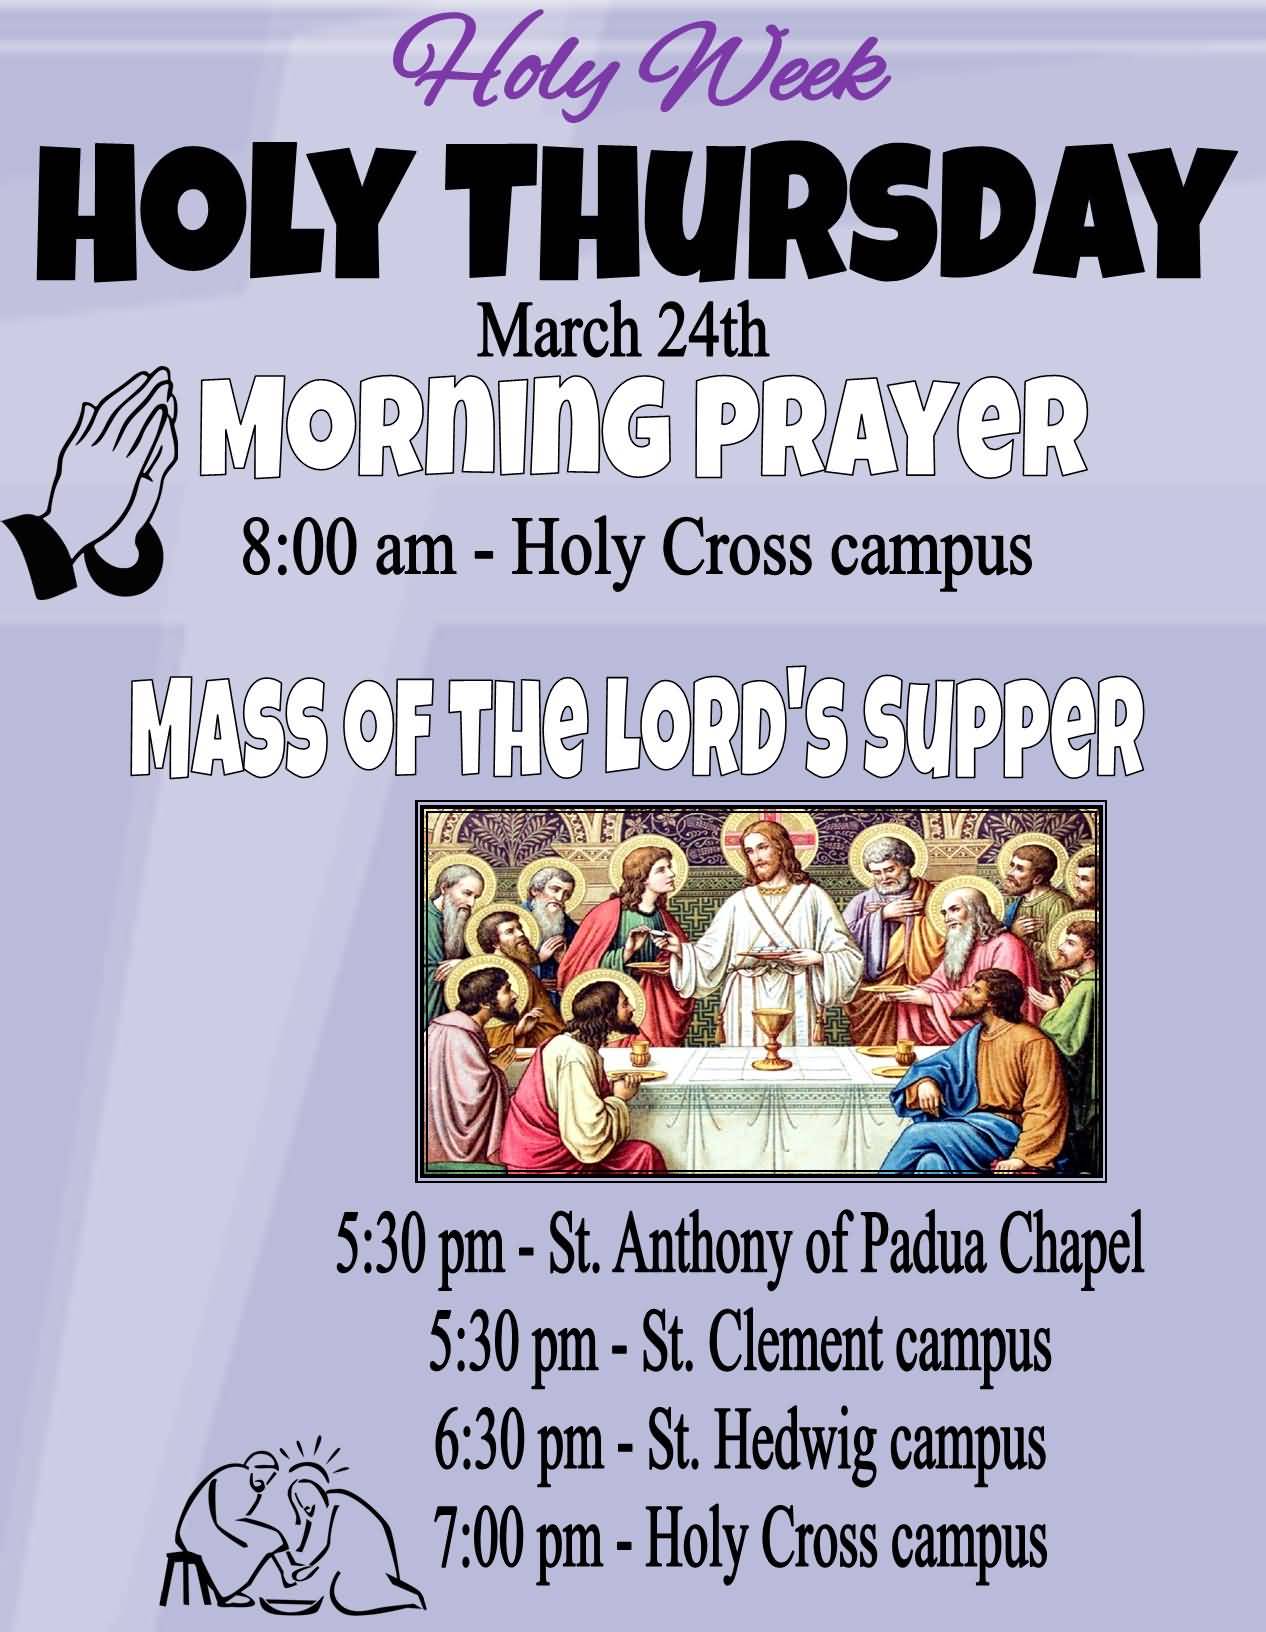 Holy Thursday Mass Of The Lord's Supper Picture